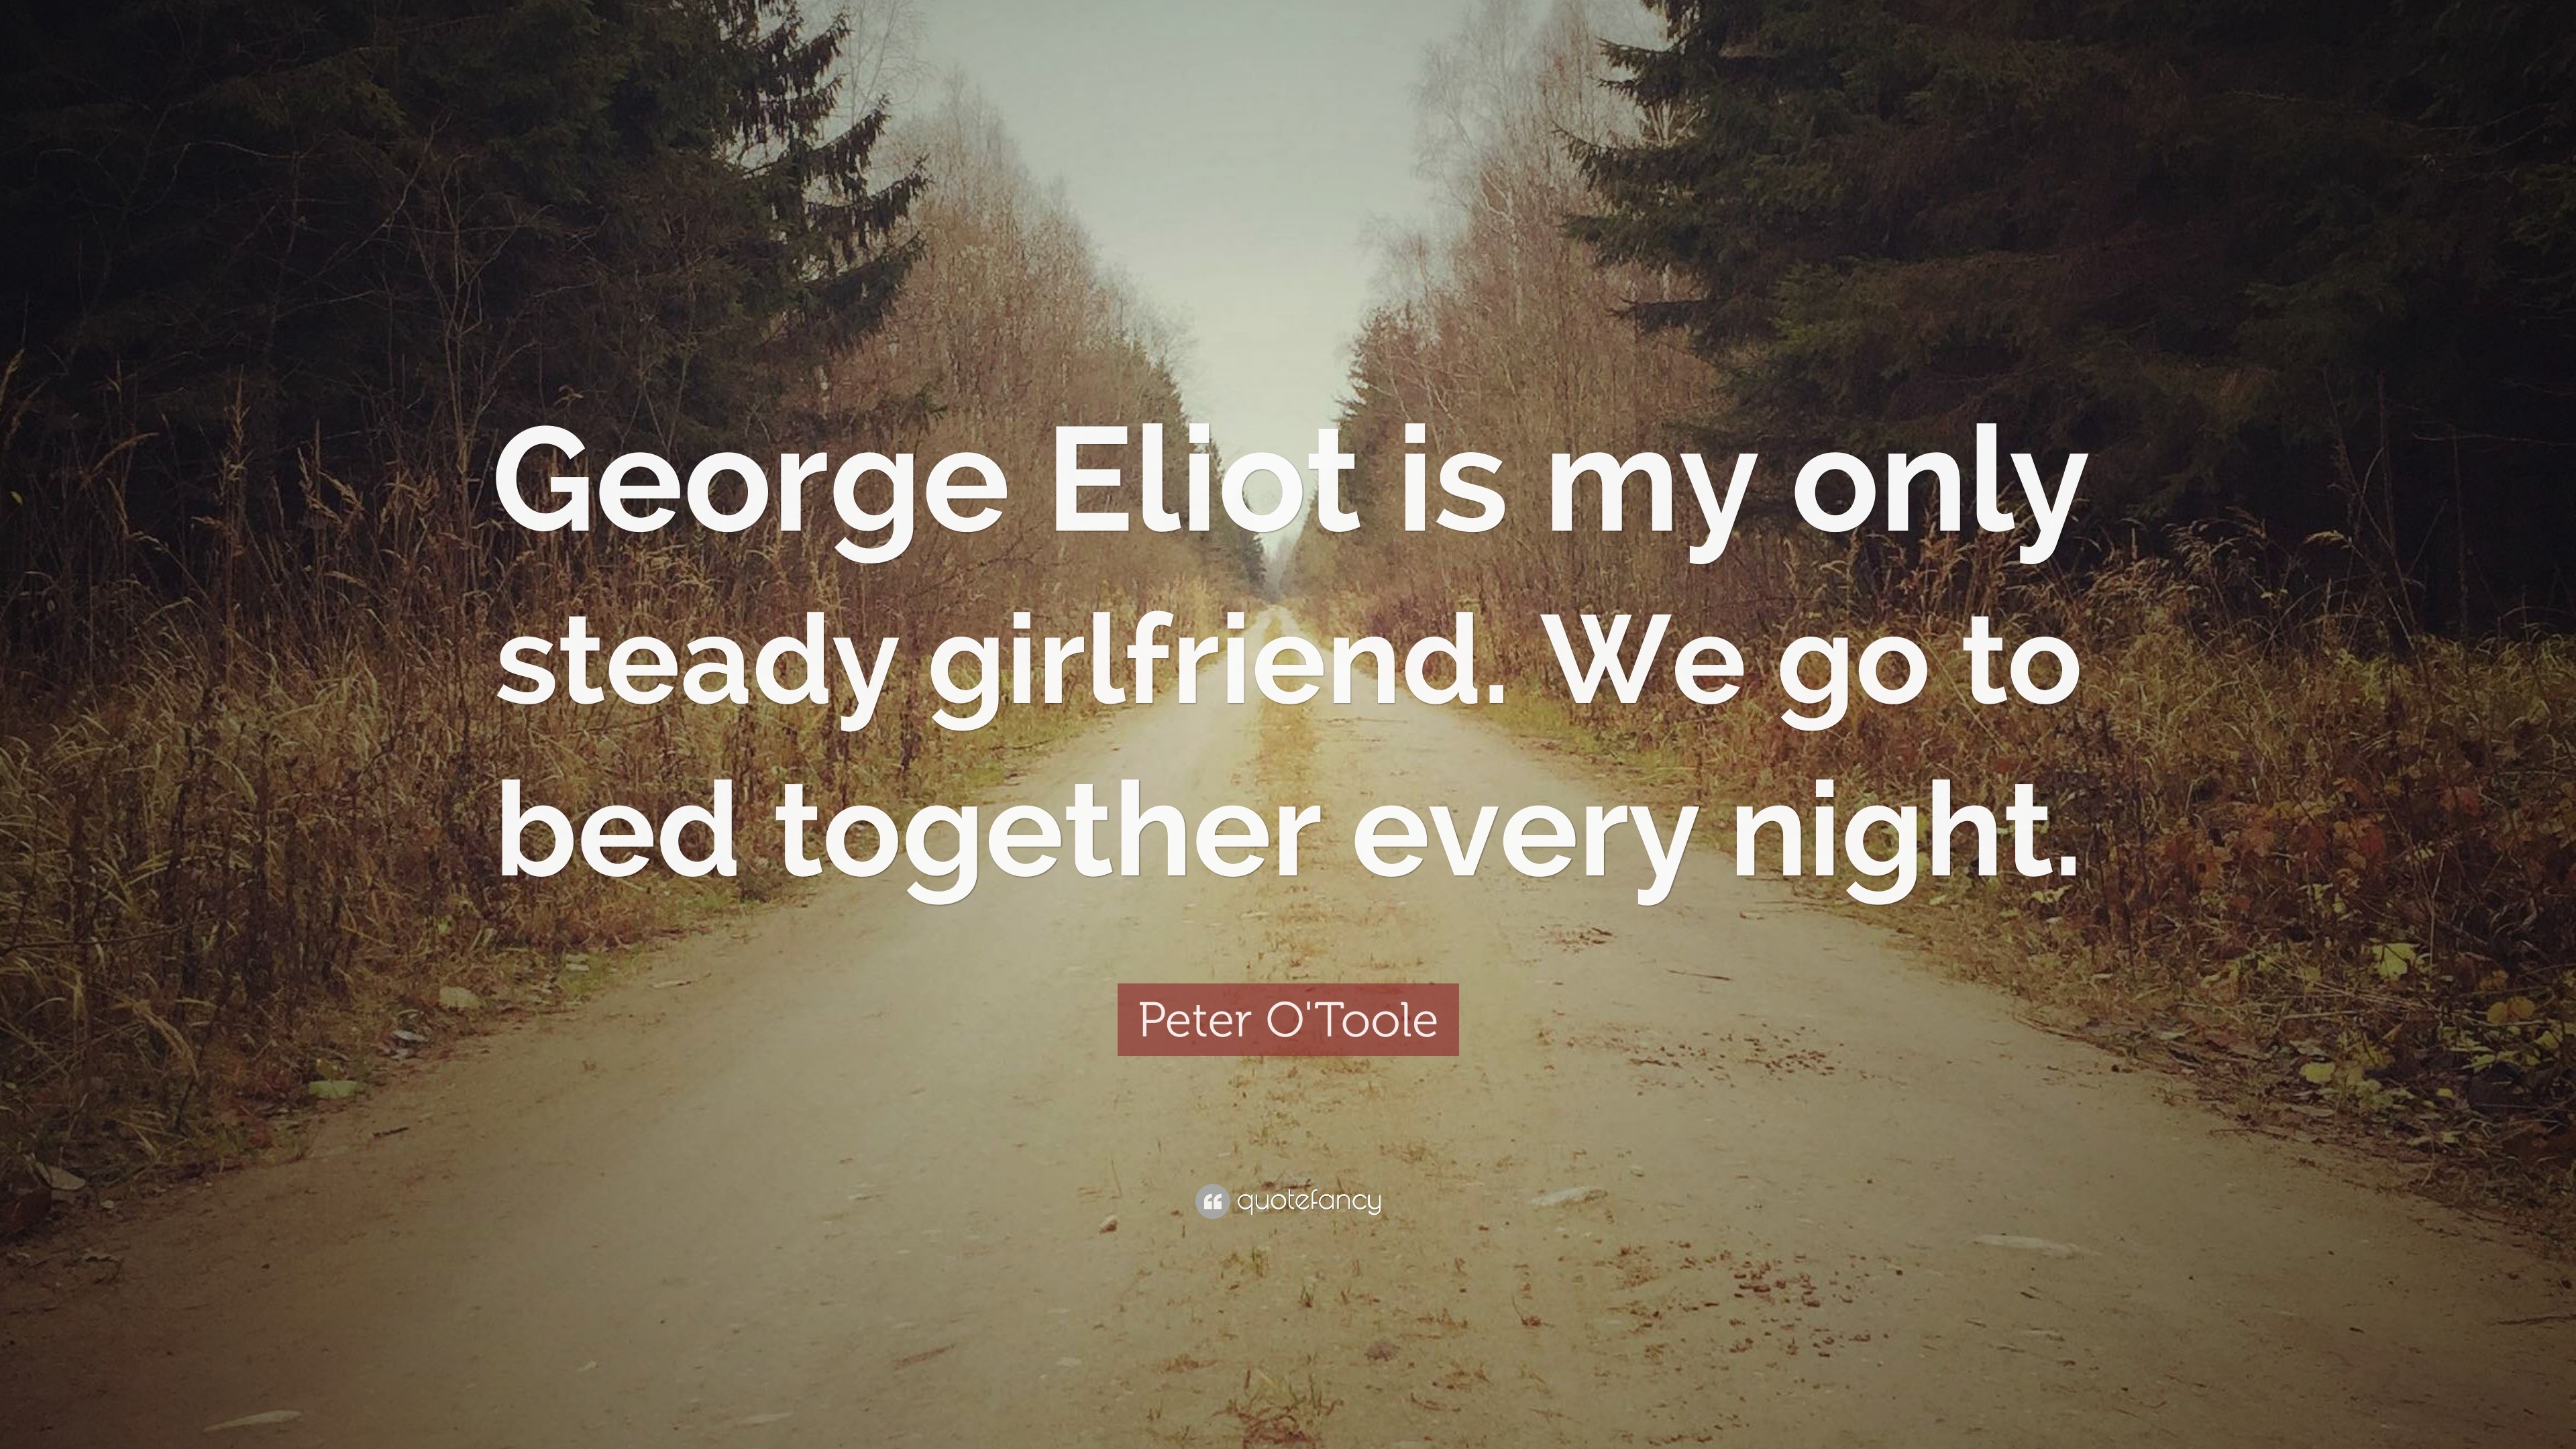 Peter O'Toole Quote Eliot is my only steady girlfriend. We go